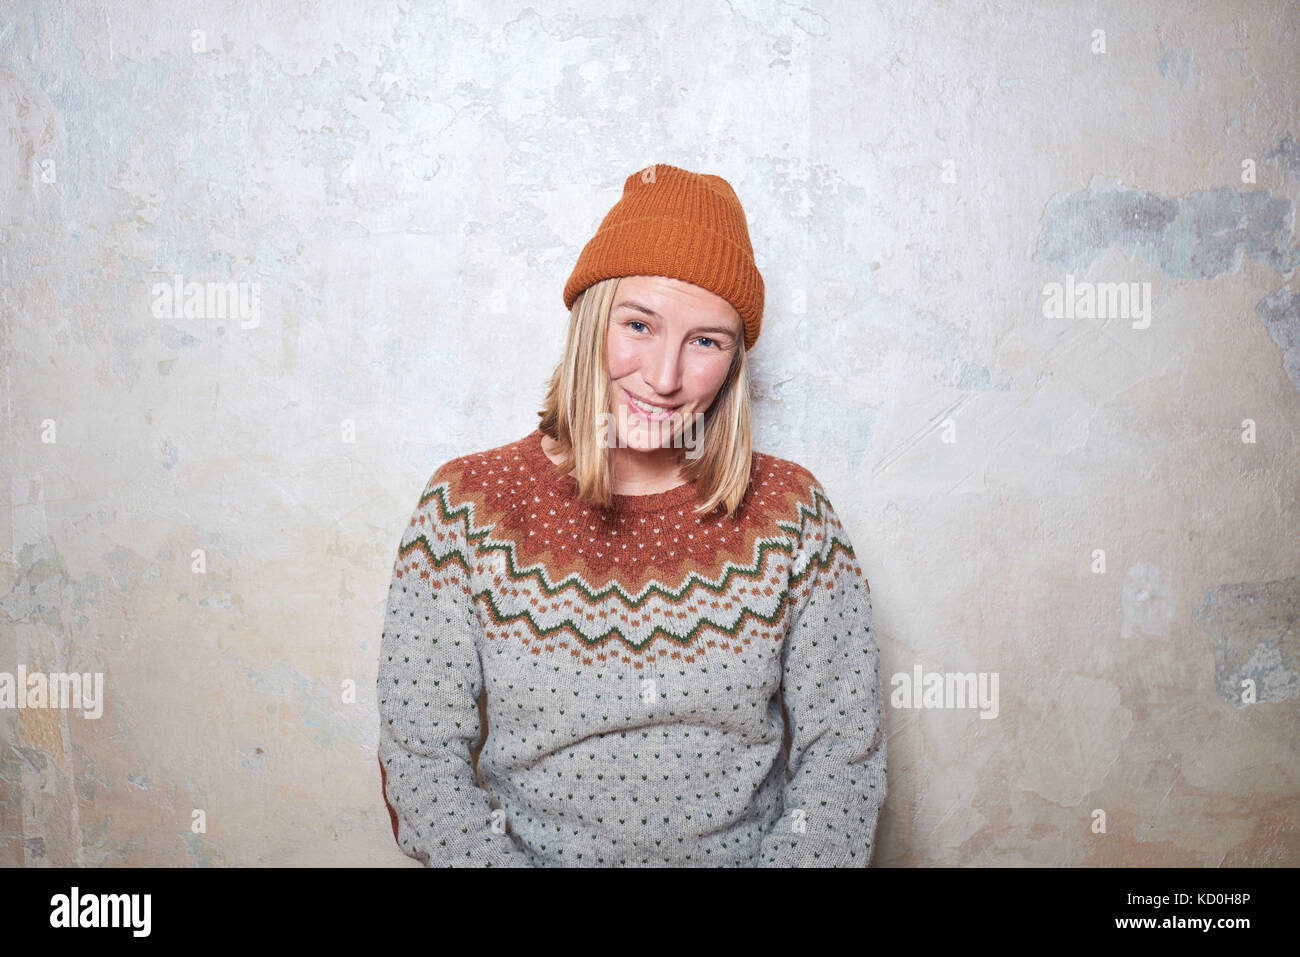 Portrait of woman wearing jumper and knitted hat, smiling Stock Photo